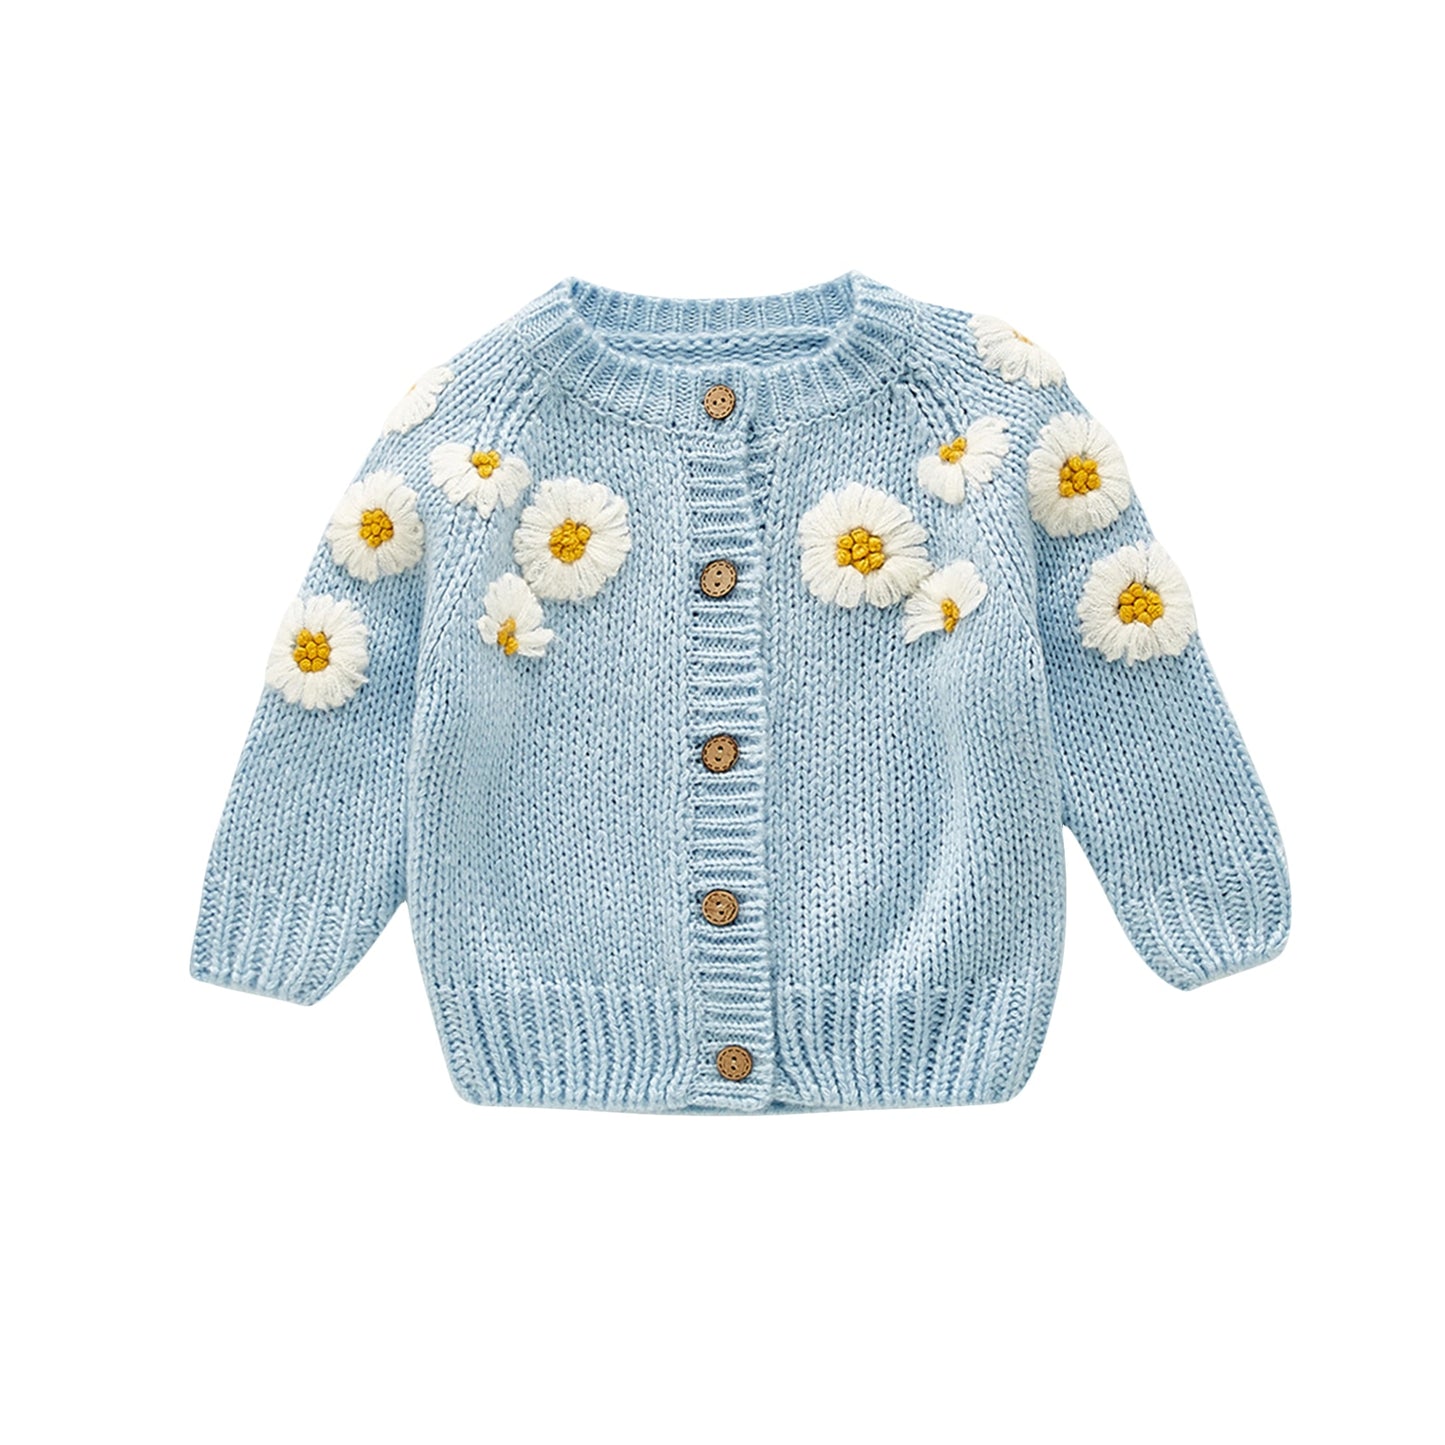 Newborn Infant Baby Girl Casual Cute Sweaters Long Sleeve O-Neck Floral Knit Jacket